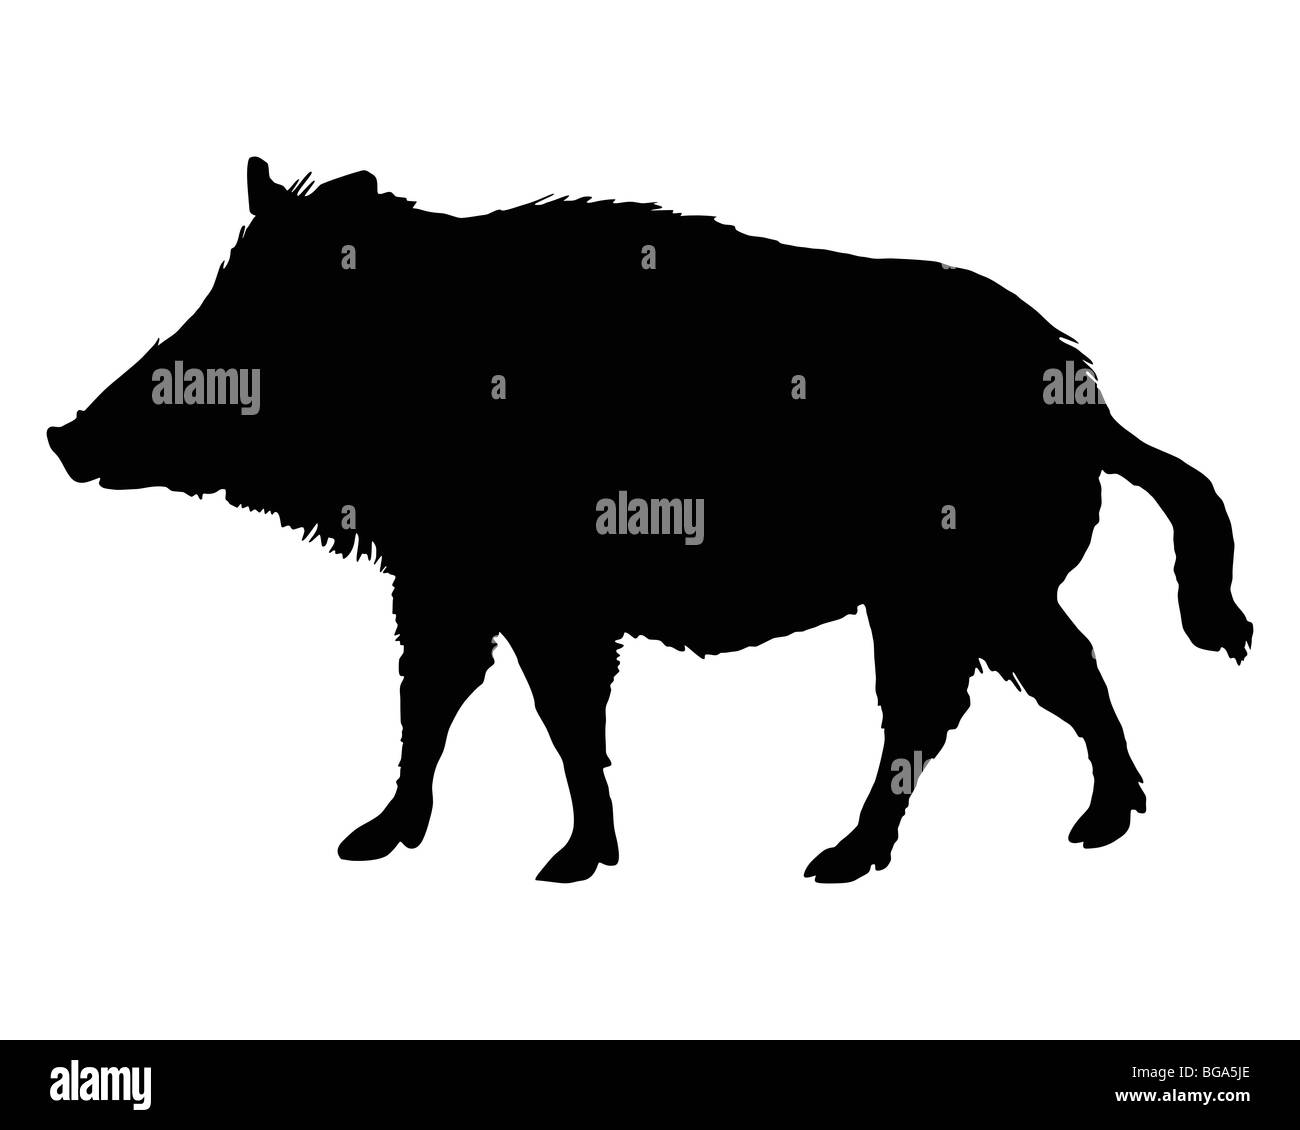 The black silhouette of a boar on white Stock Photo